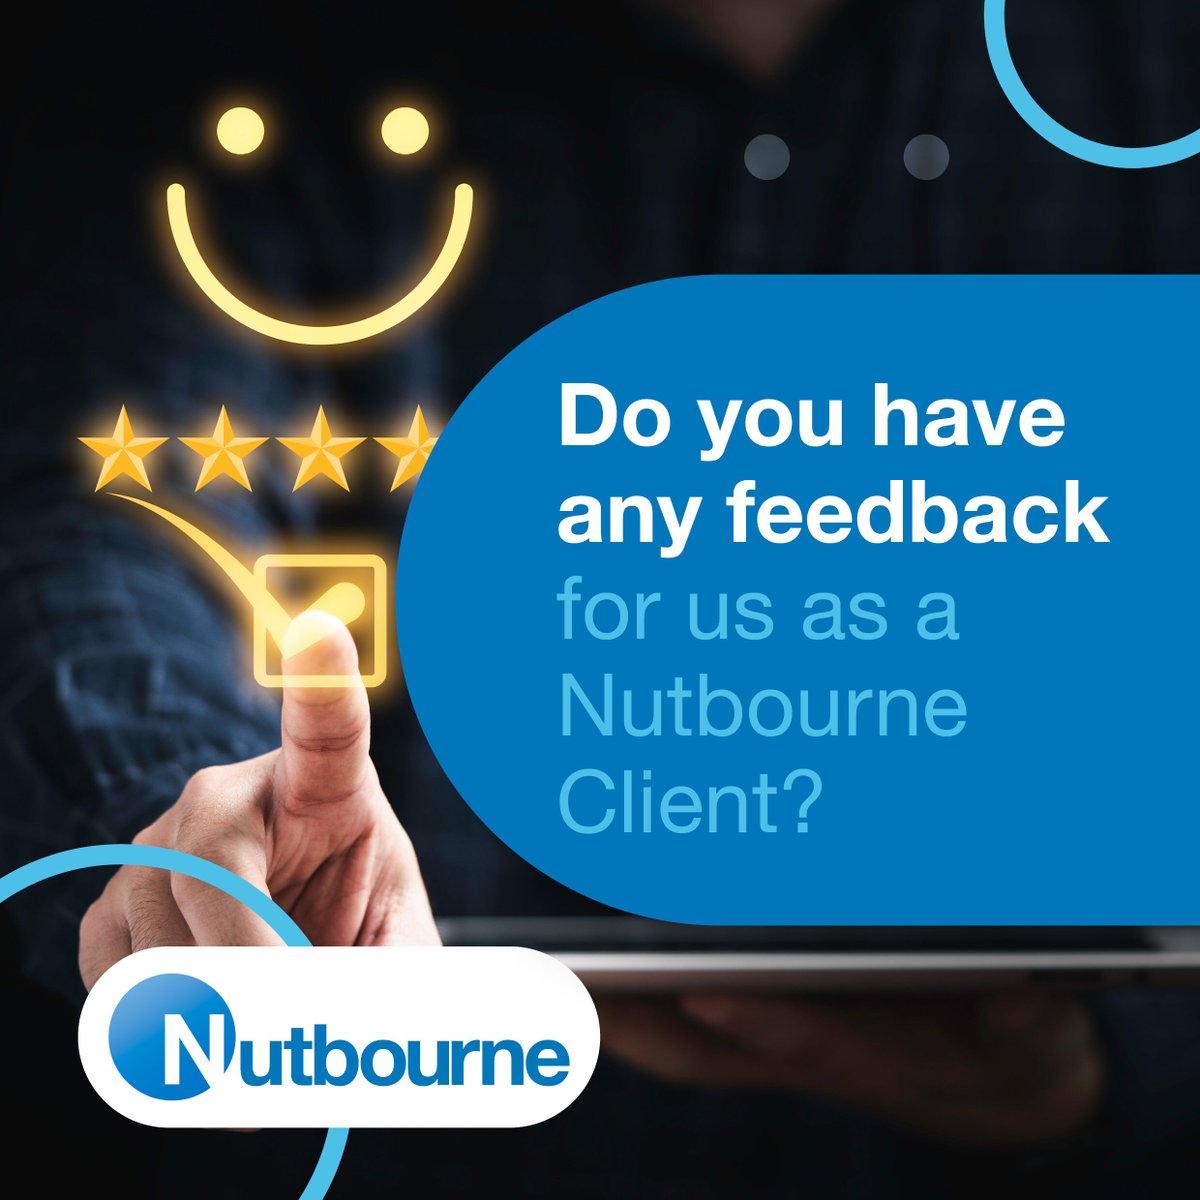 At Nutbourne, we are always striving to improve our services and exceed our clients' expectations. We would love to hear from you - what do you think we could do better? Share your feedback or suggestions in the comments below. We're listening! #CustomerFeedback #ITSupport